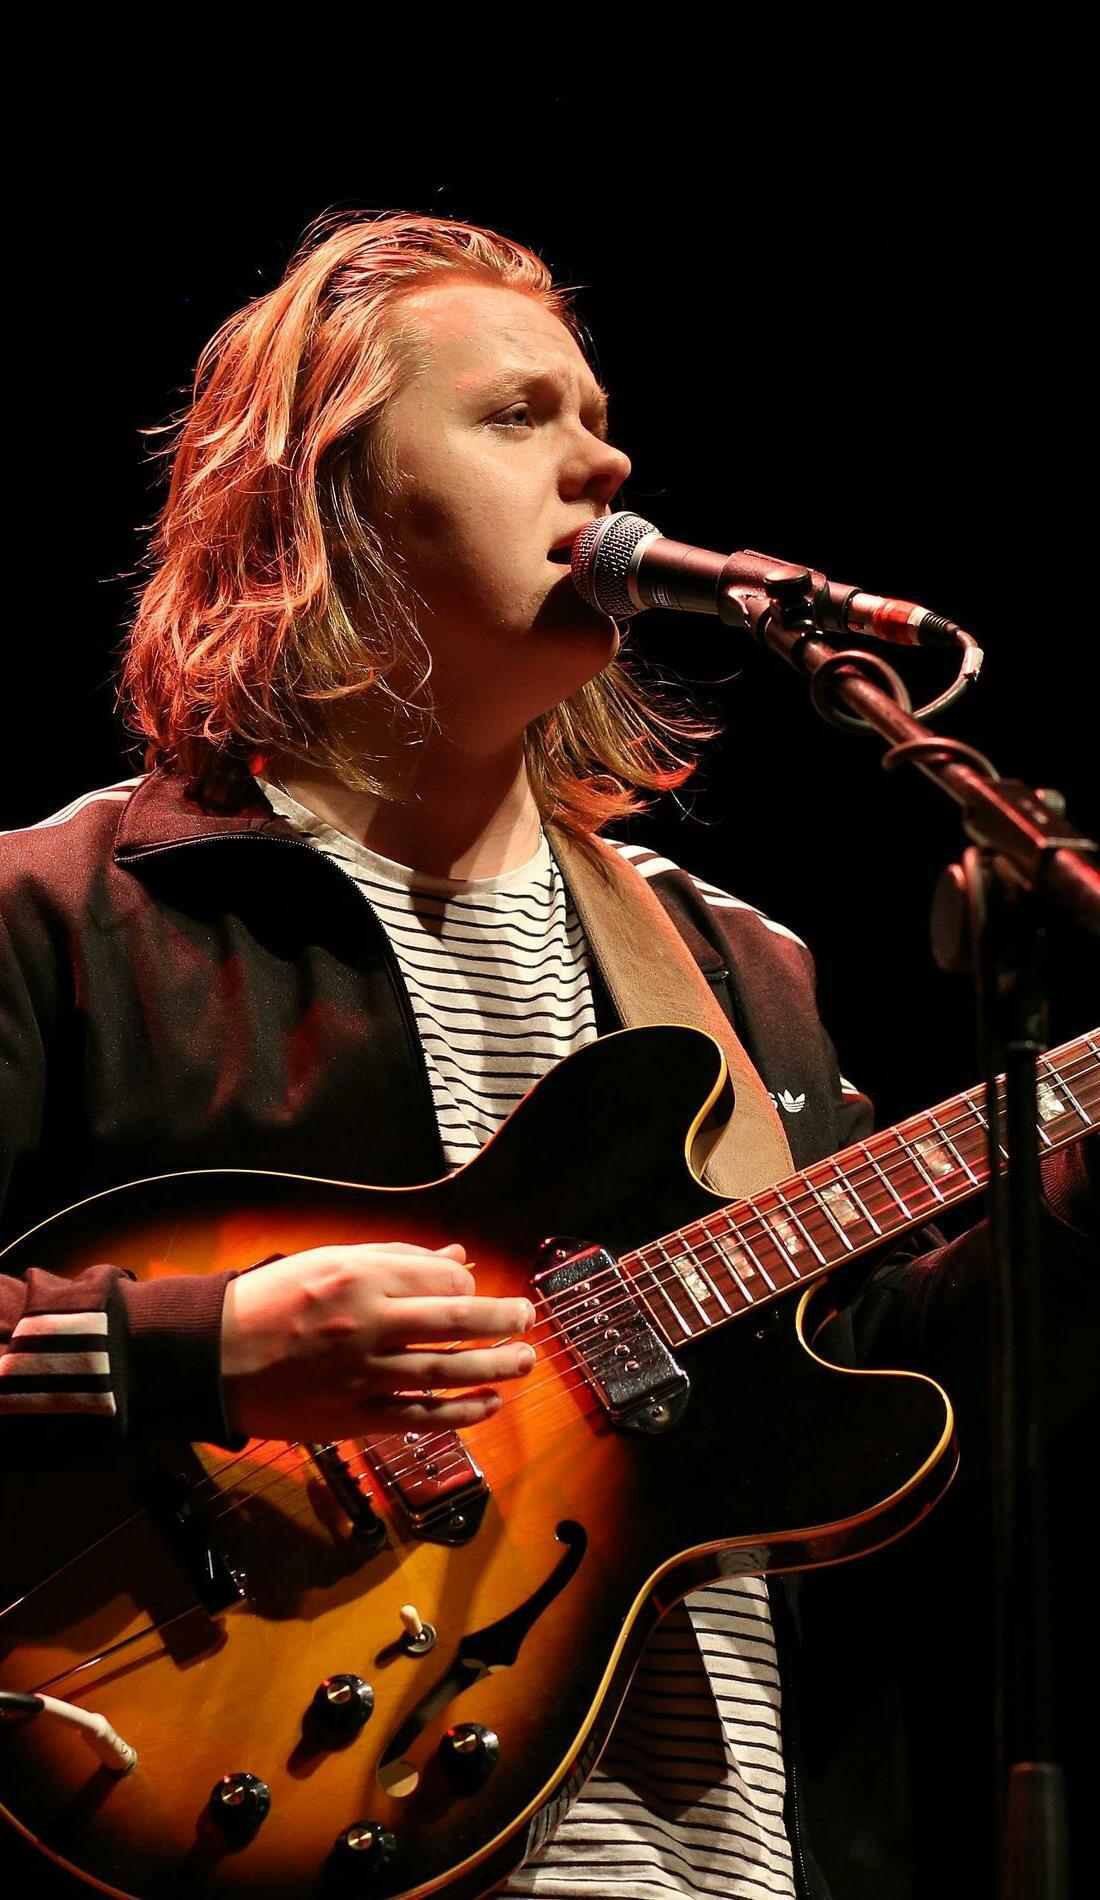 Lewis Capaldi - Monday 14th August at Pryzm, 5:00pm (14+)